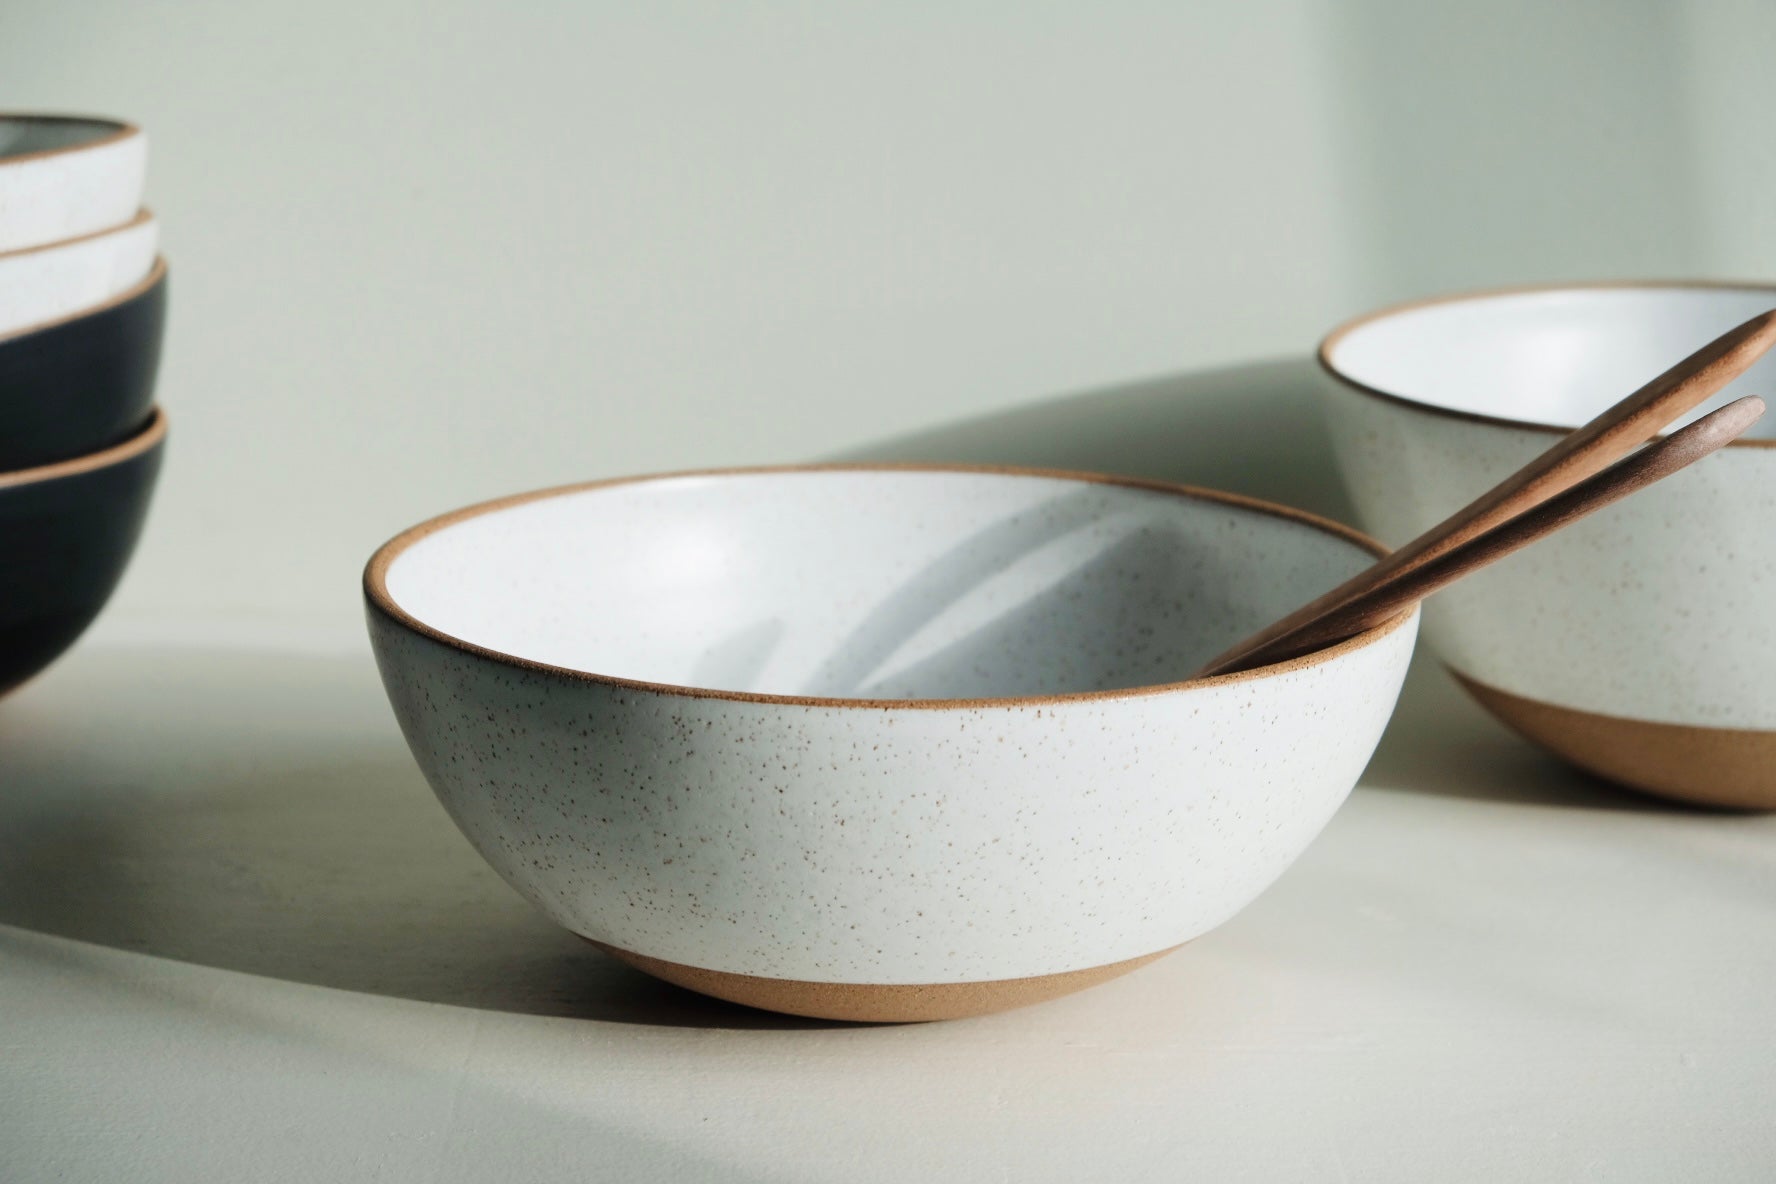 A medium-to-large serving bowl with a 3/4 glaze dip in white.